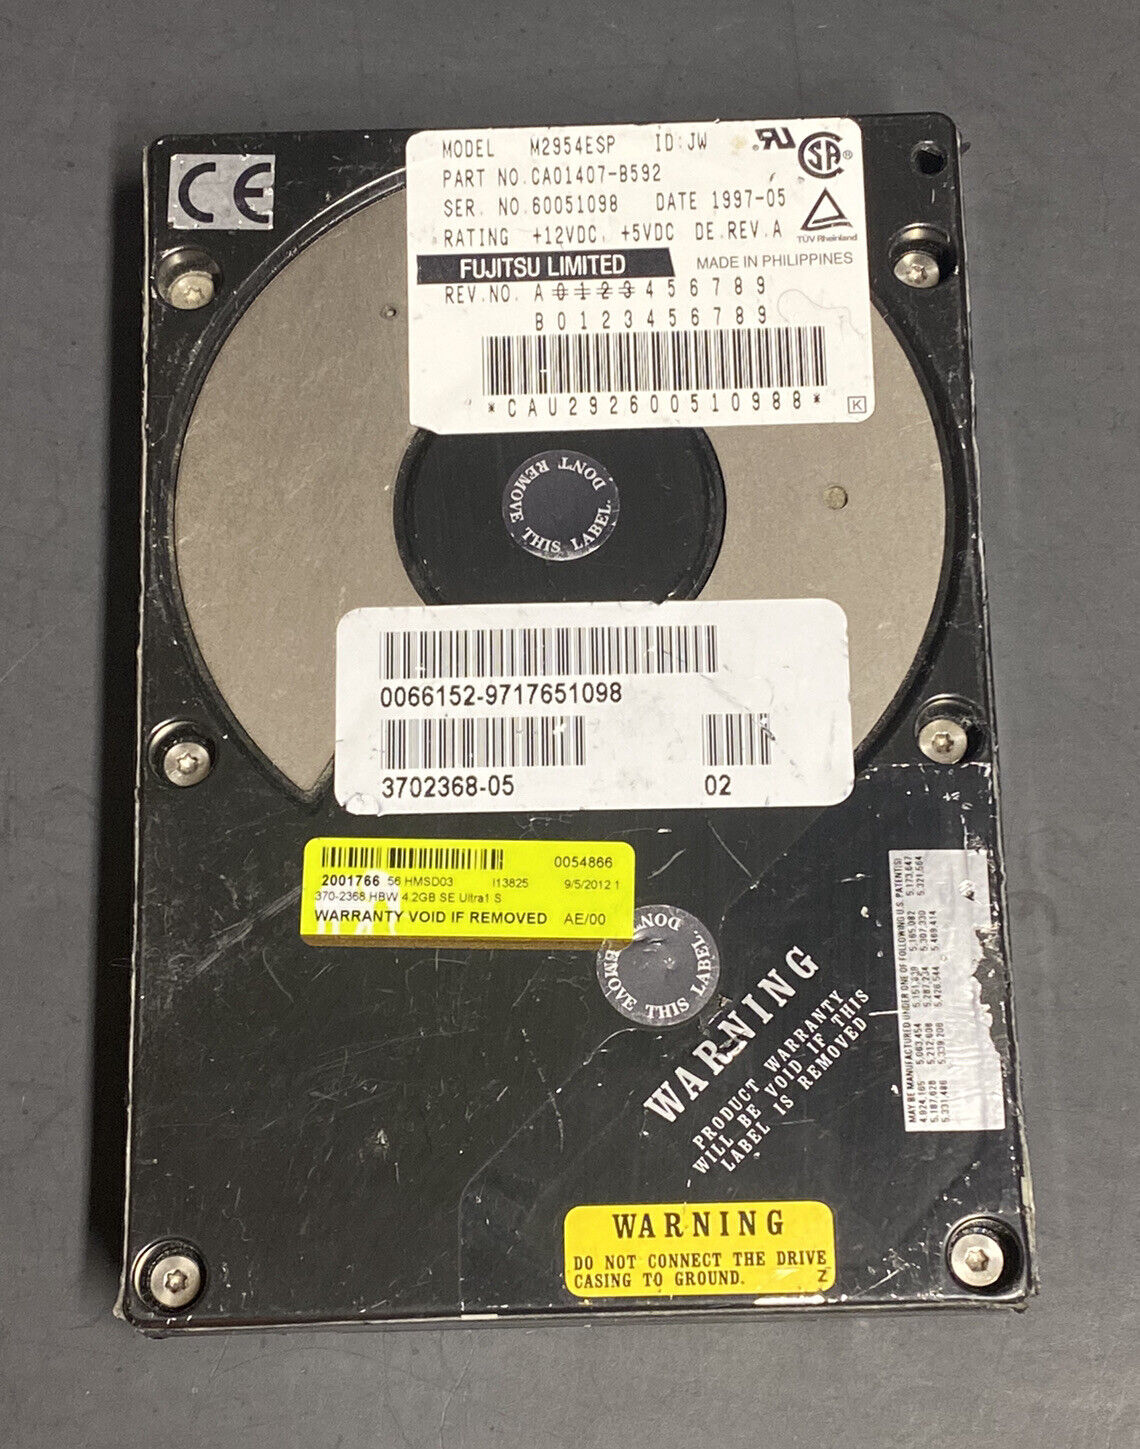 SUN 370-2368-05  4.2GB 3.5-Inch 7200RPM Single Ended Ultra-1 SCSI 80-Pin HDD